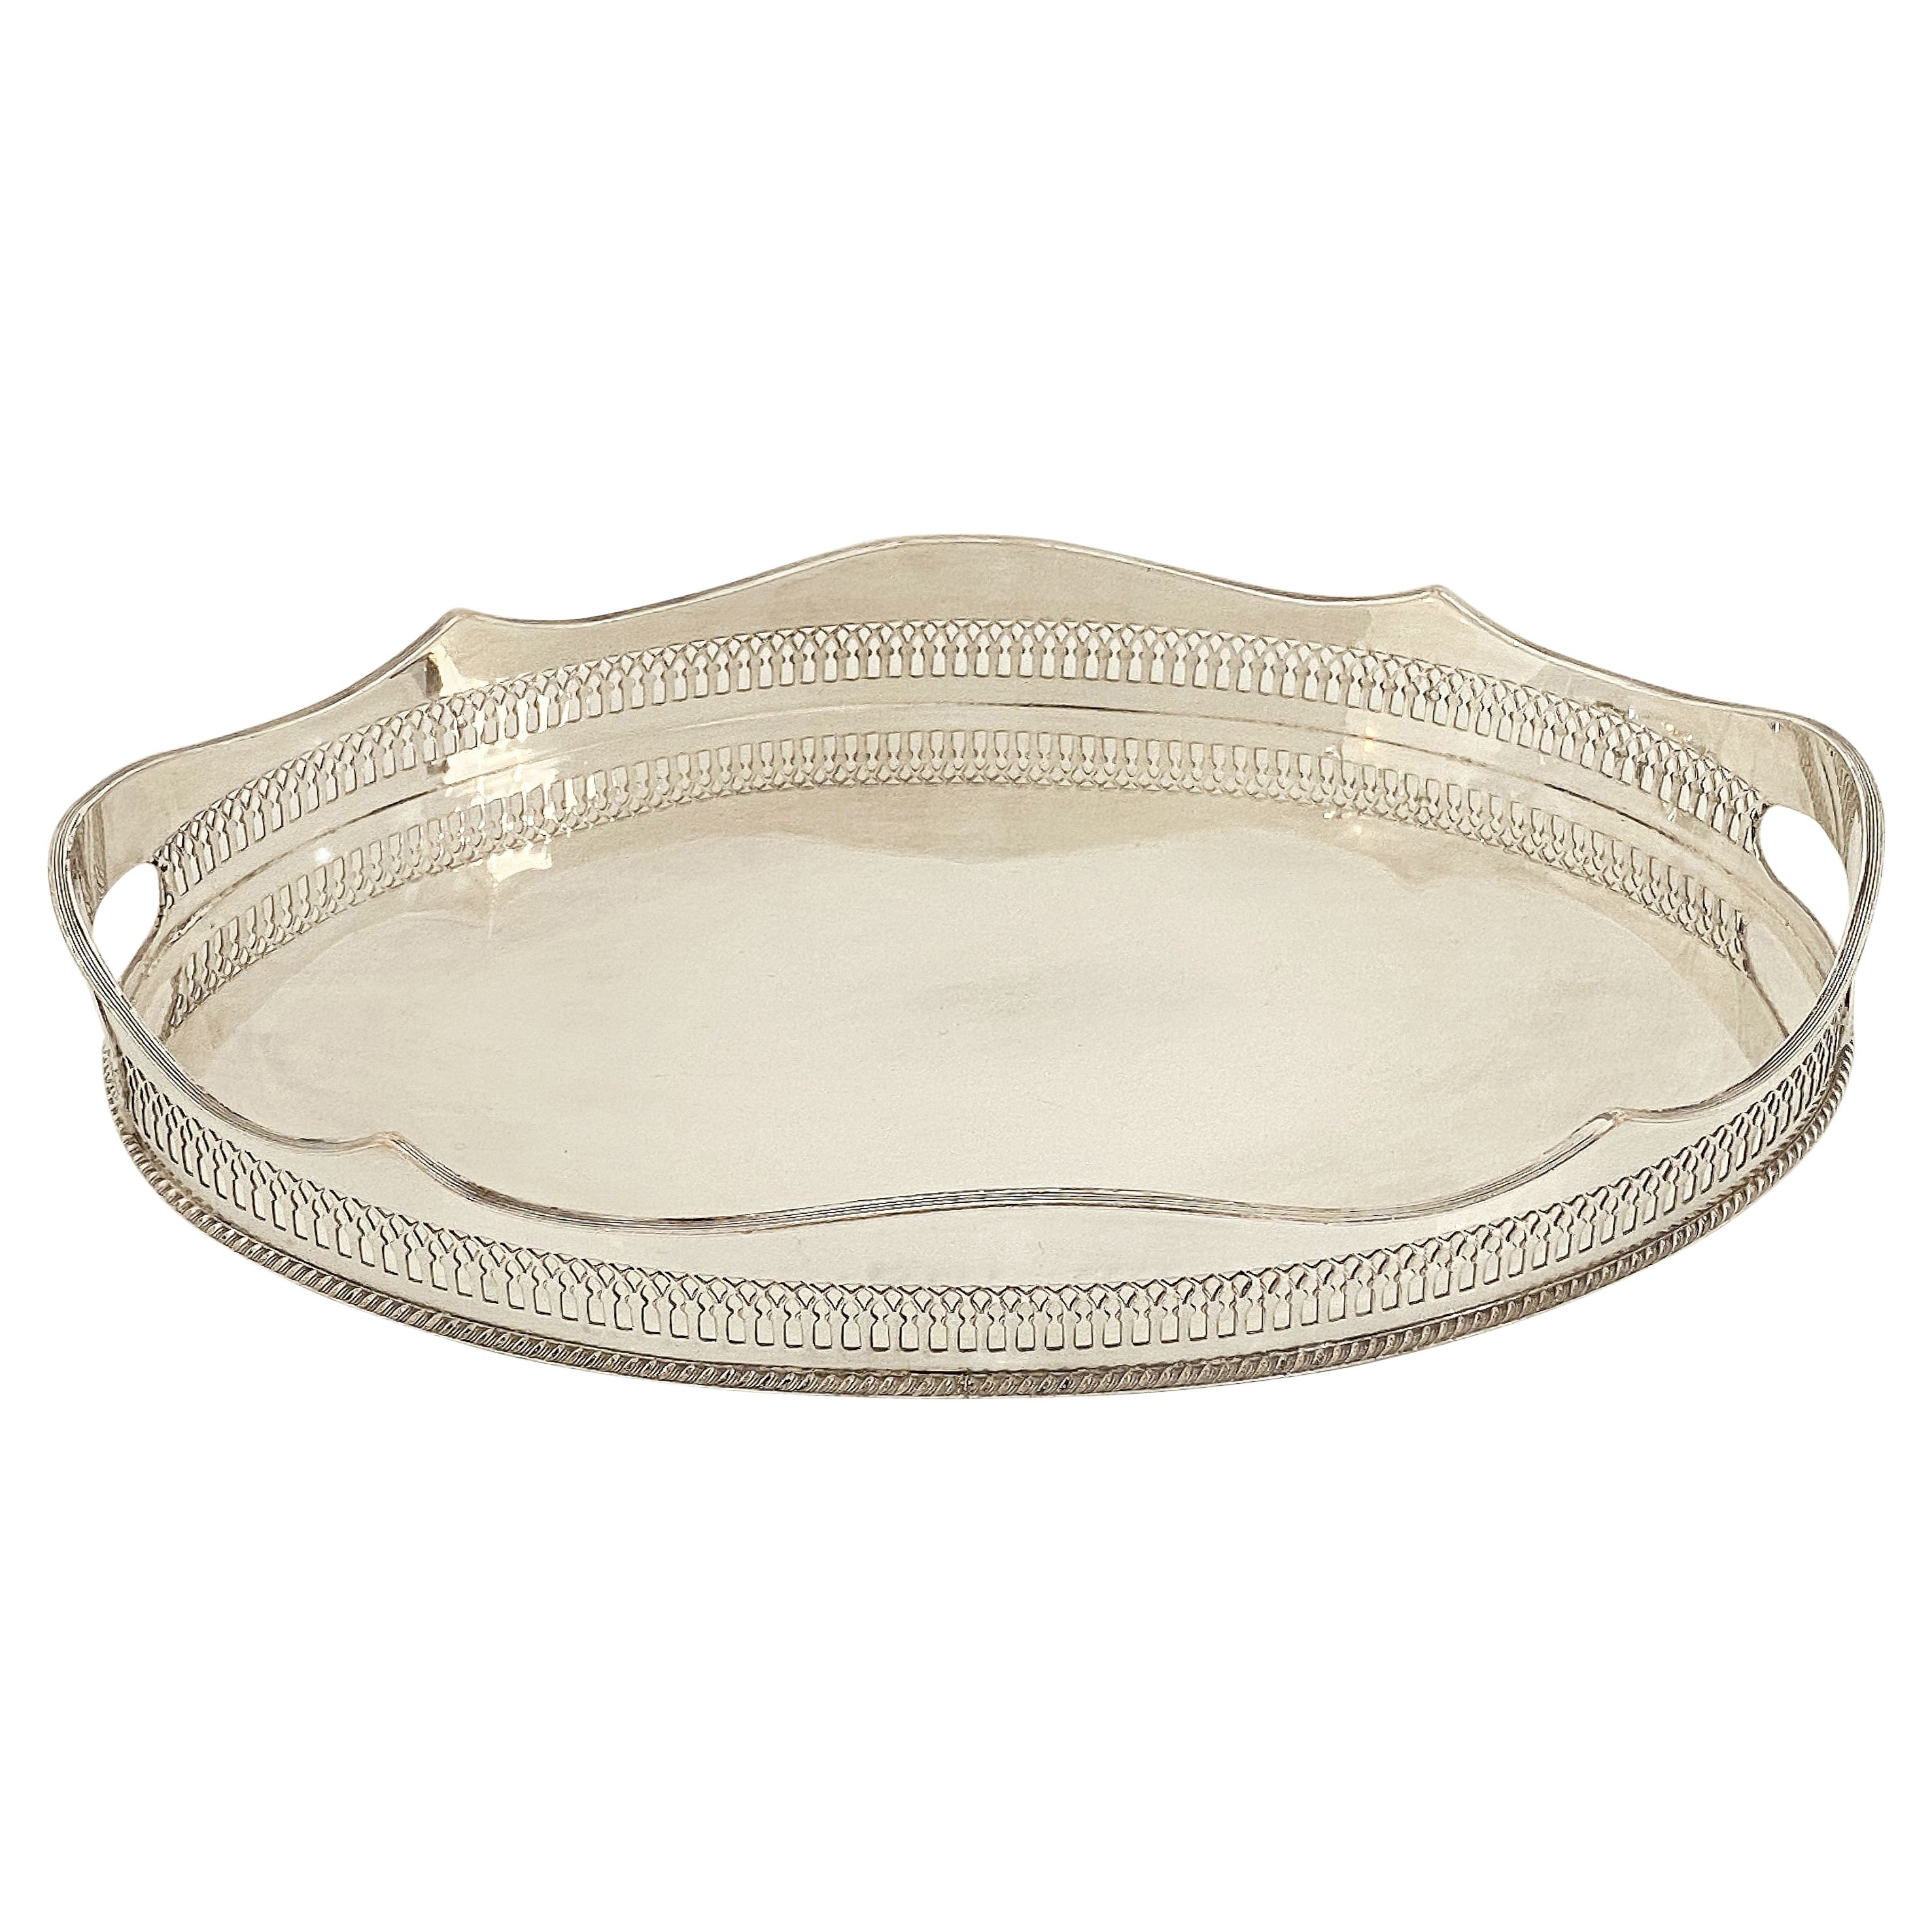 English Silver Oval Gallery Serving or Drinks Tray